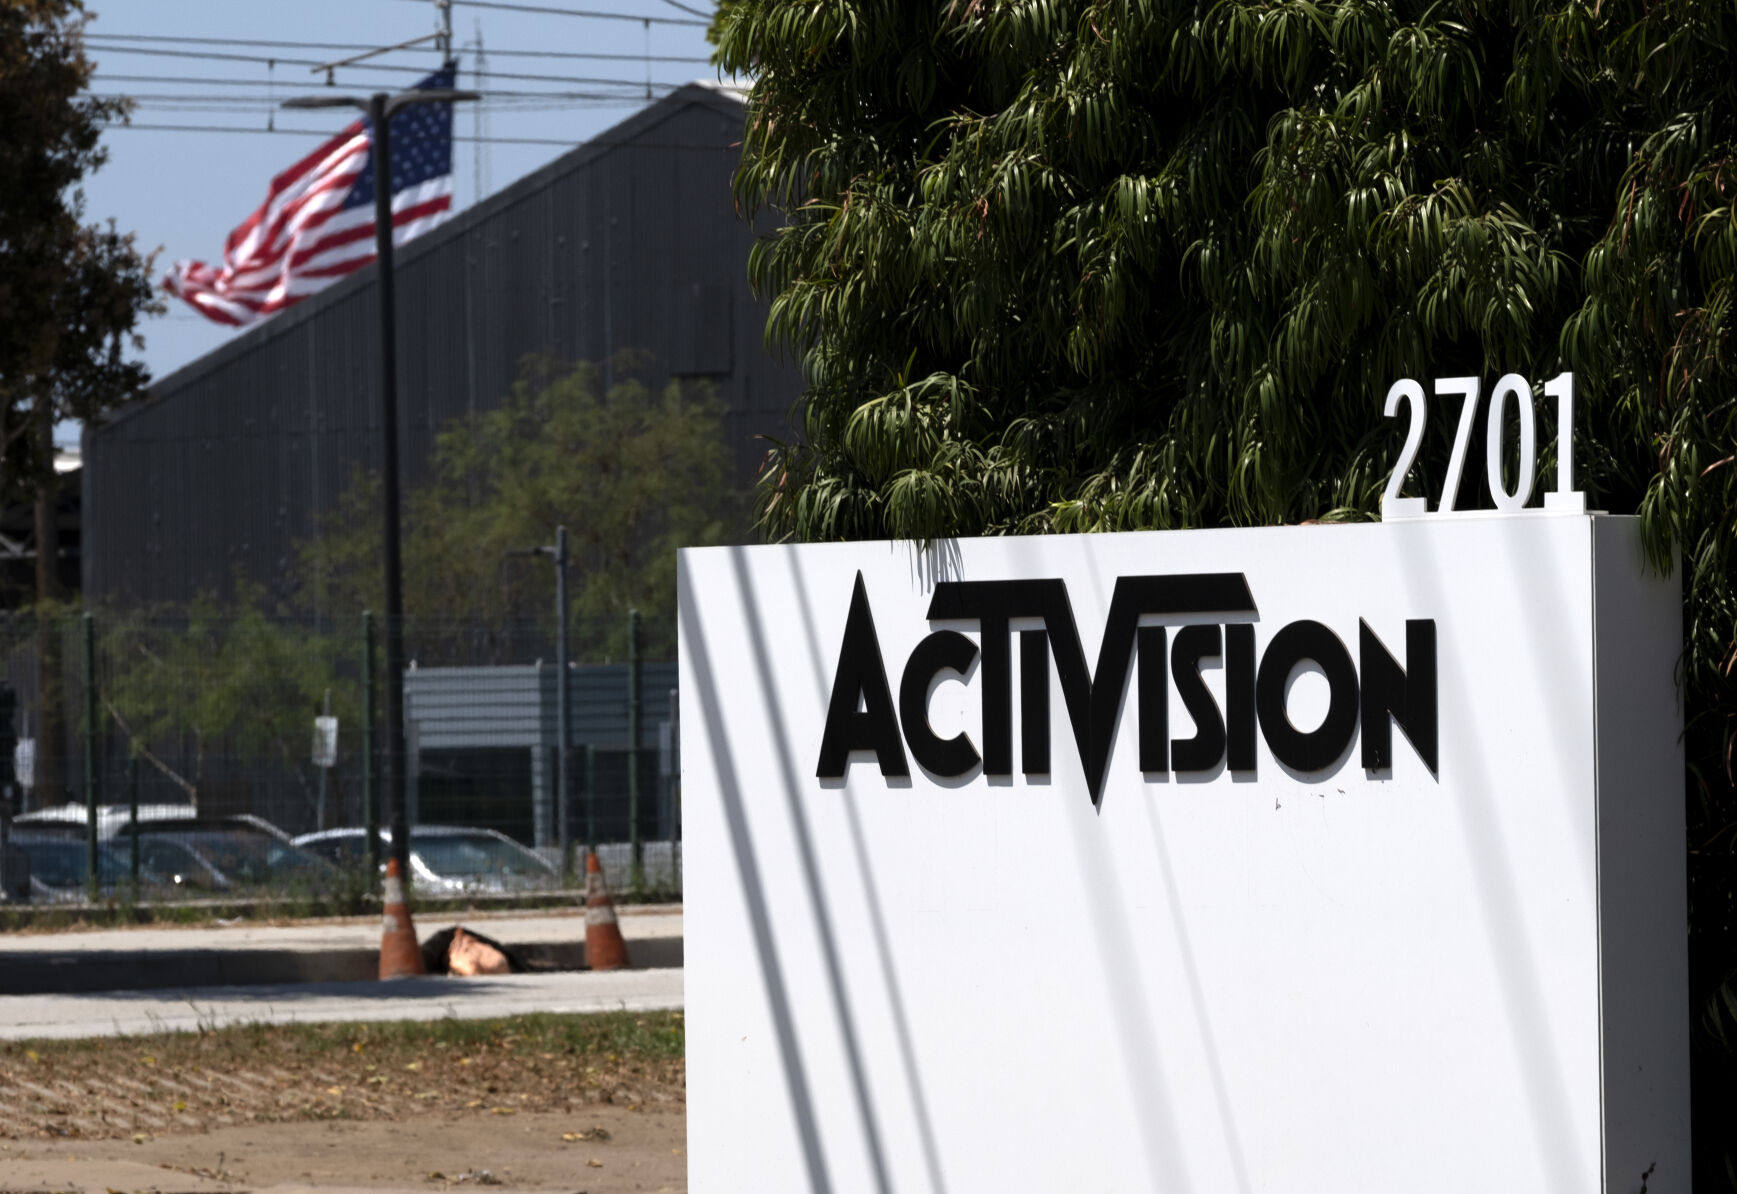 <p>FILE - A sign is seen outside the Activision building in Santa Monica, Calif. on June 21, 2023. Microsoft’s purchase of video game maker Activision Blizzard won final approval Friday, Oct. 13, from Britain’s competition watchdog, reversing its earlier decision to block the $69 billion deal and removing a last obstacle for one of the largest tech transactions in history. (AP Photo/Richard Vogel, File)</p>   PHOTO CREDIT: Richard Vogel - staff, ASSOCIATED PRESS